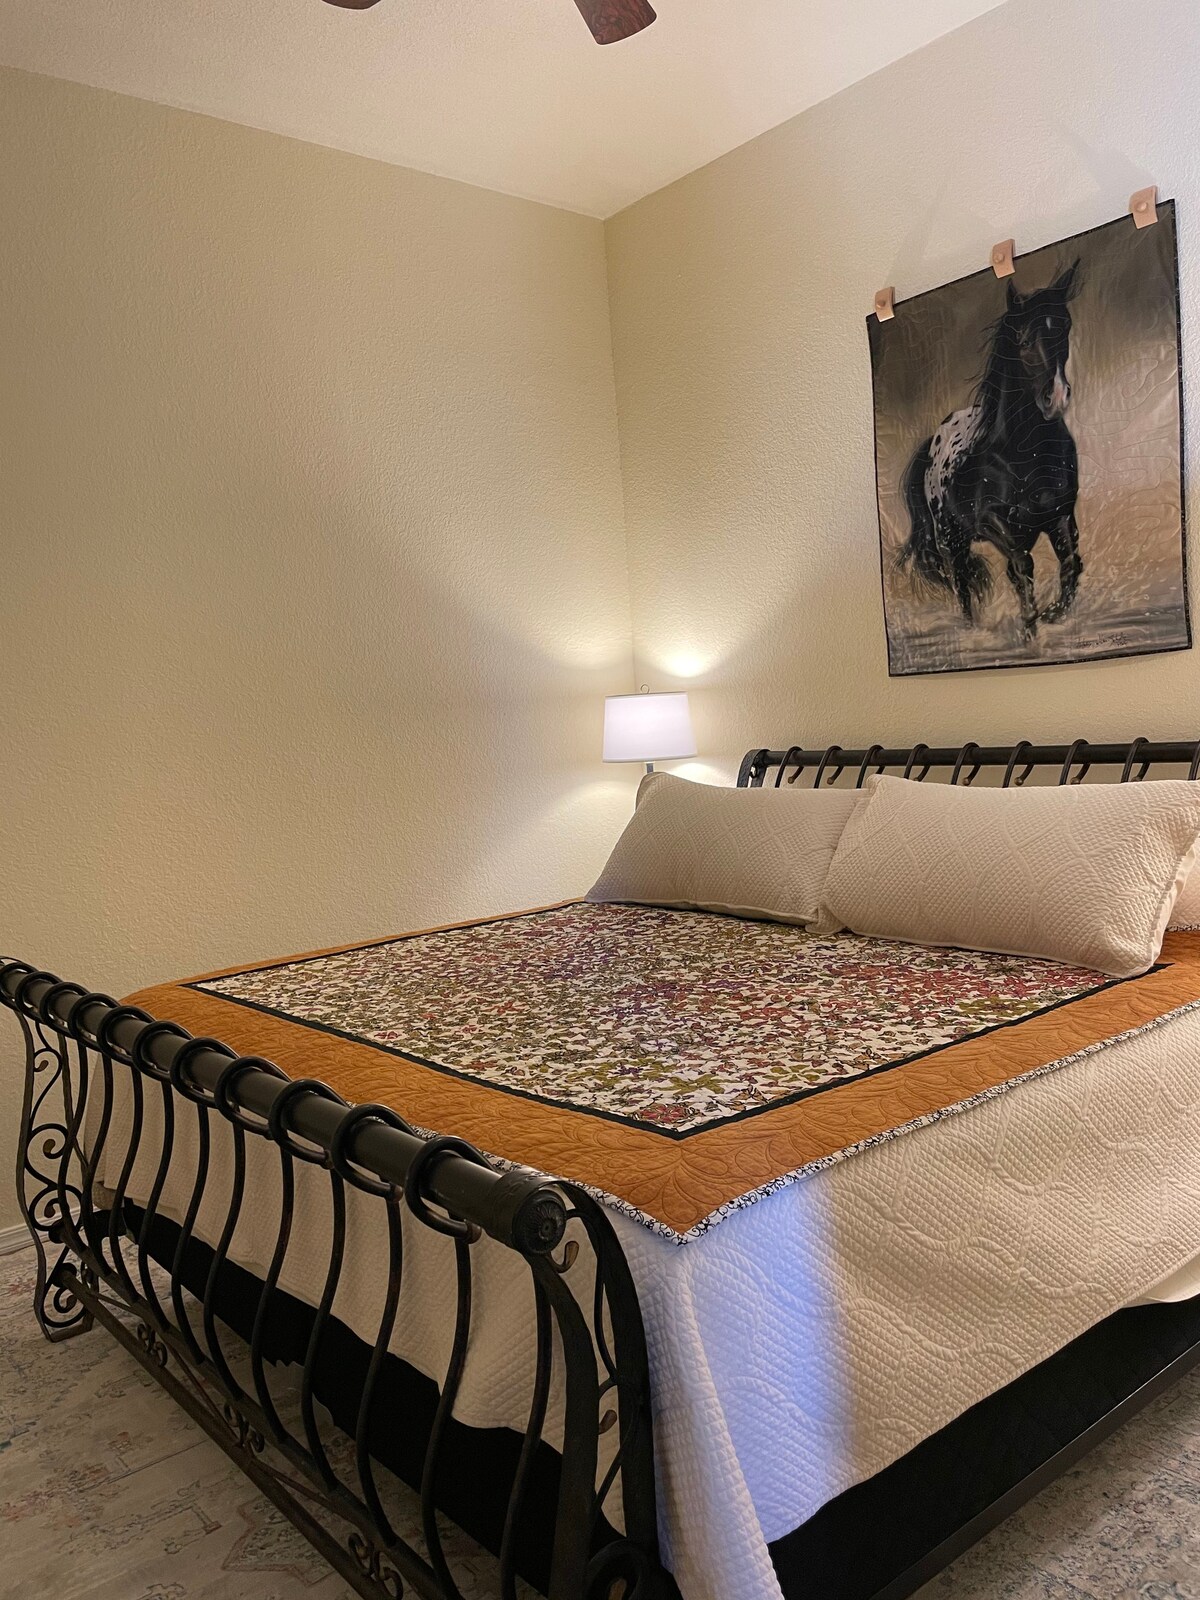 The "Appaloosa Room" at Yaqui Hideout.